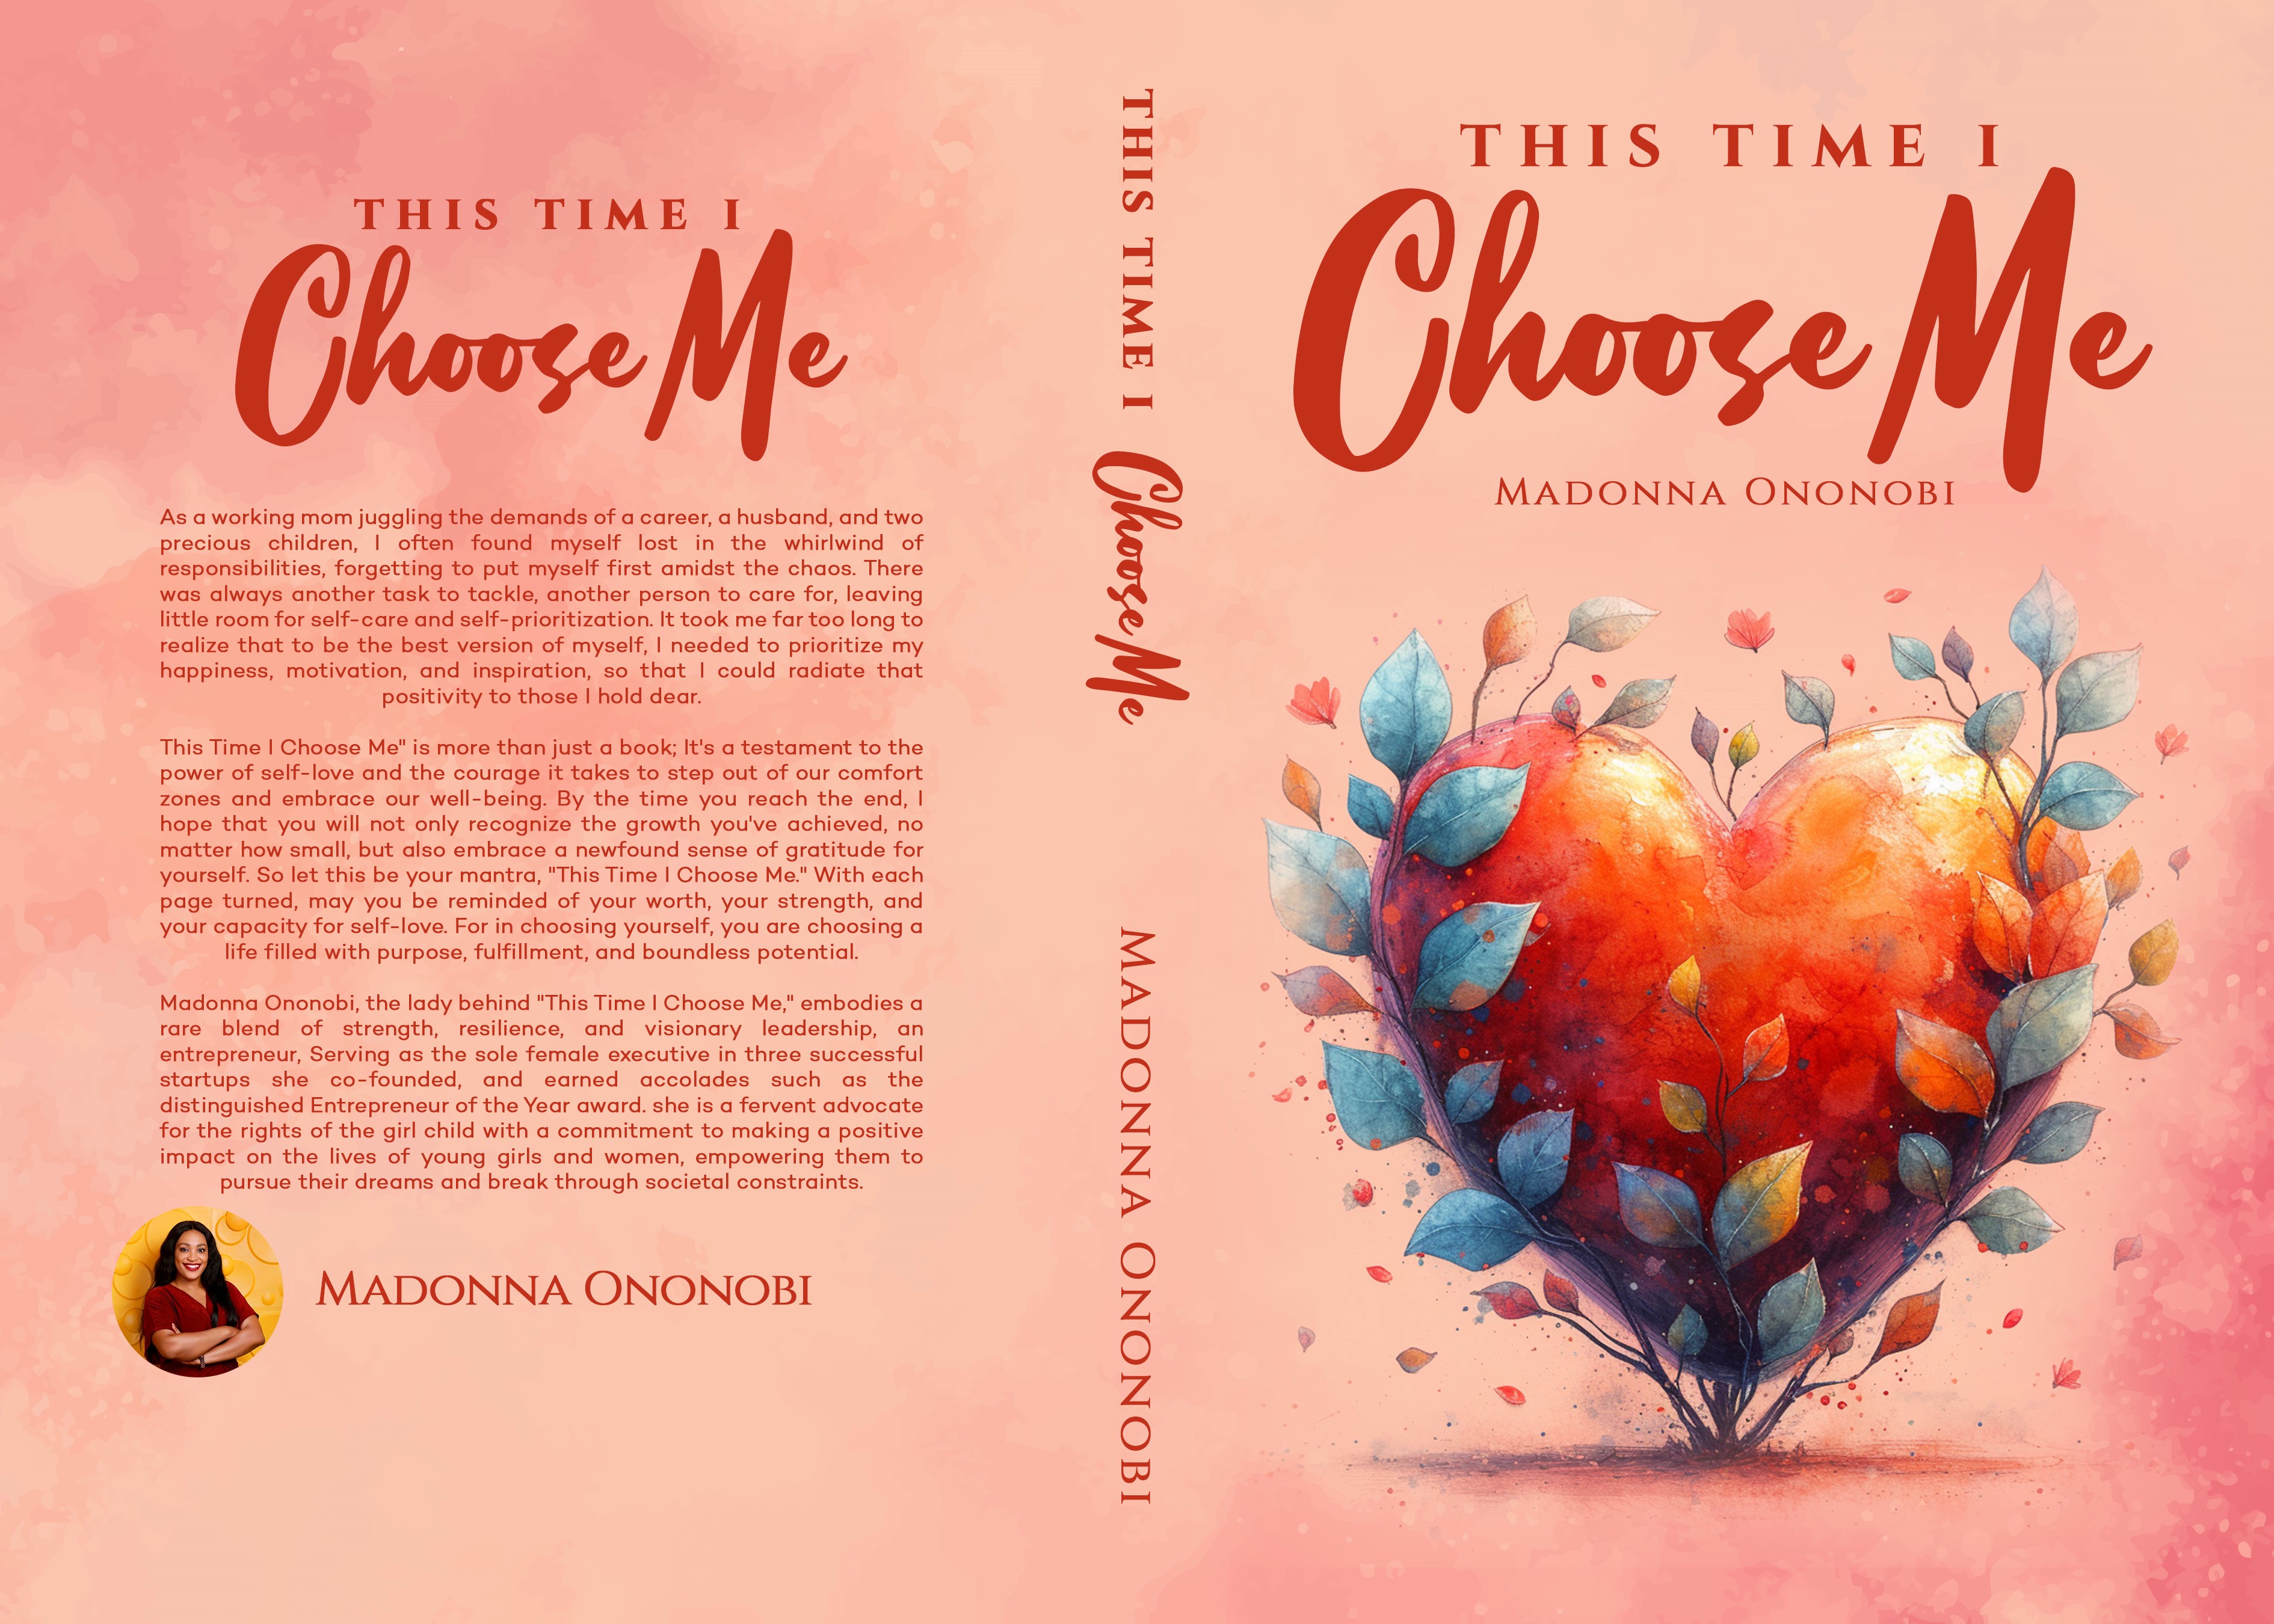 Embracing Myself: 'This Time I Choose Me' - A Journey by Madonna Nnenna Ononobi